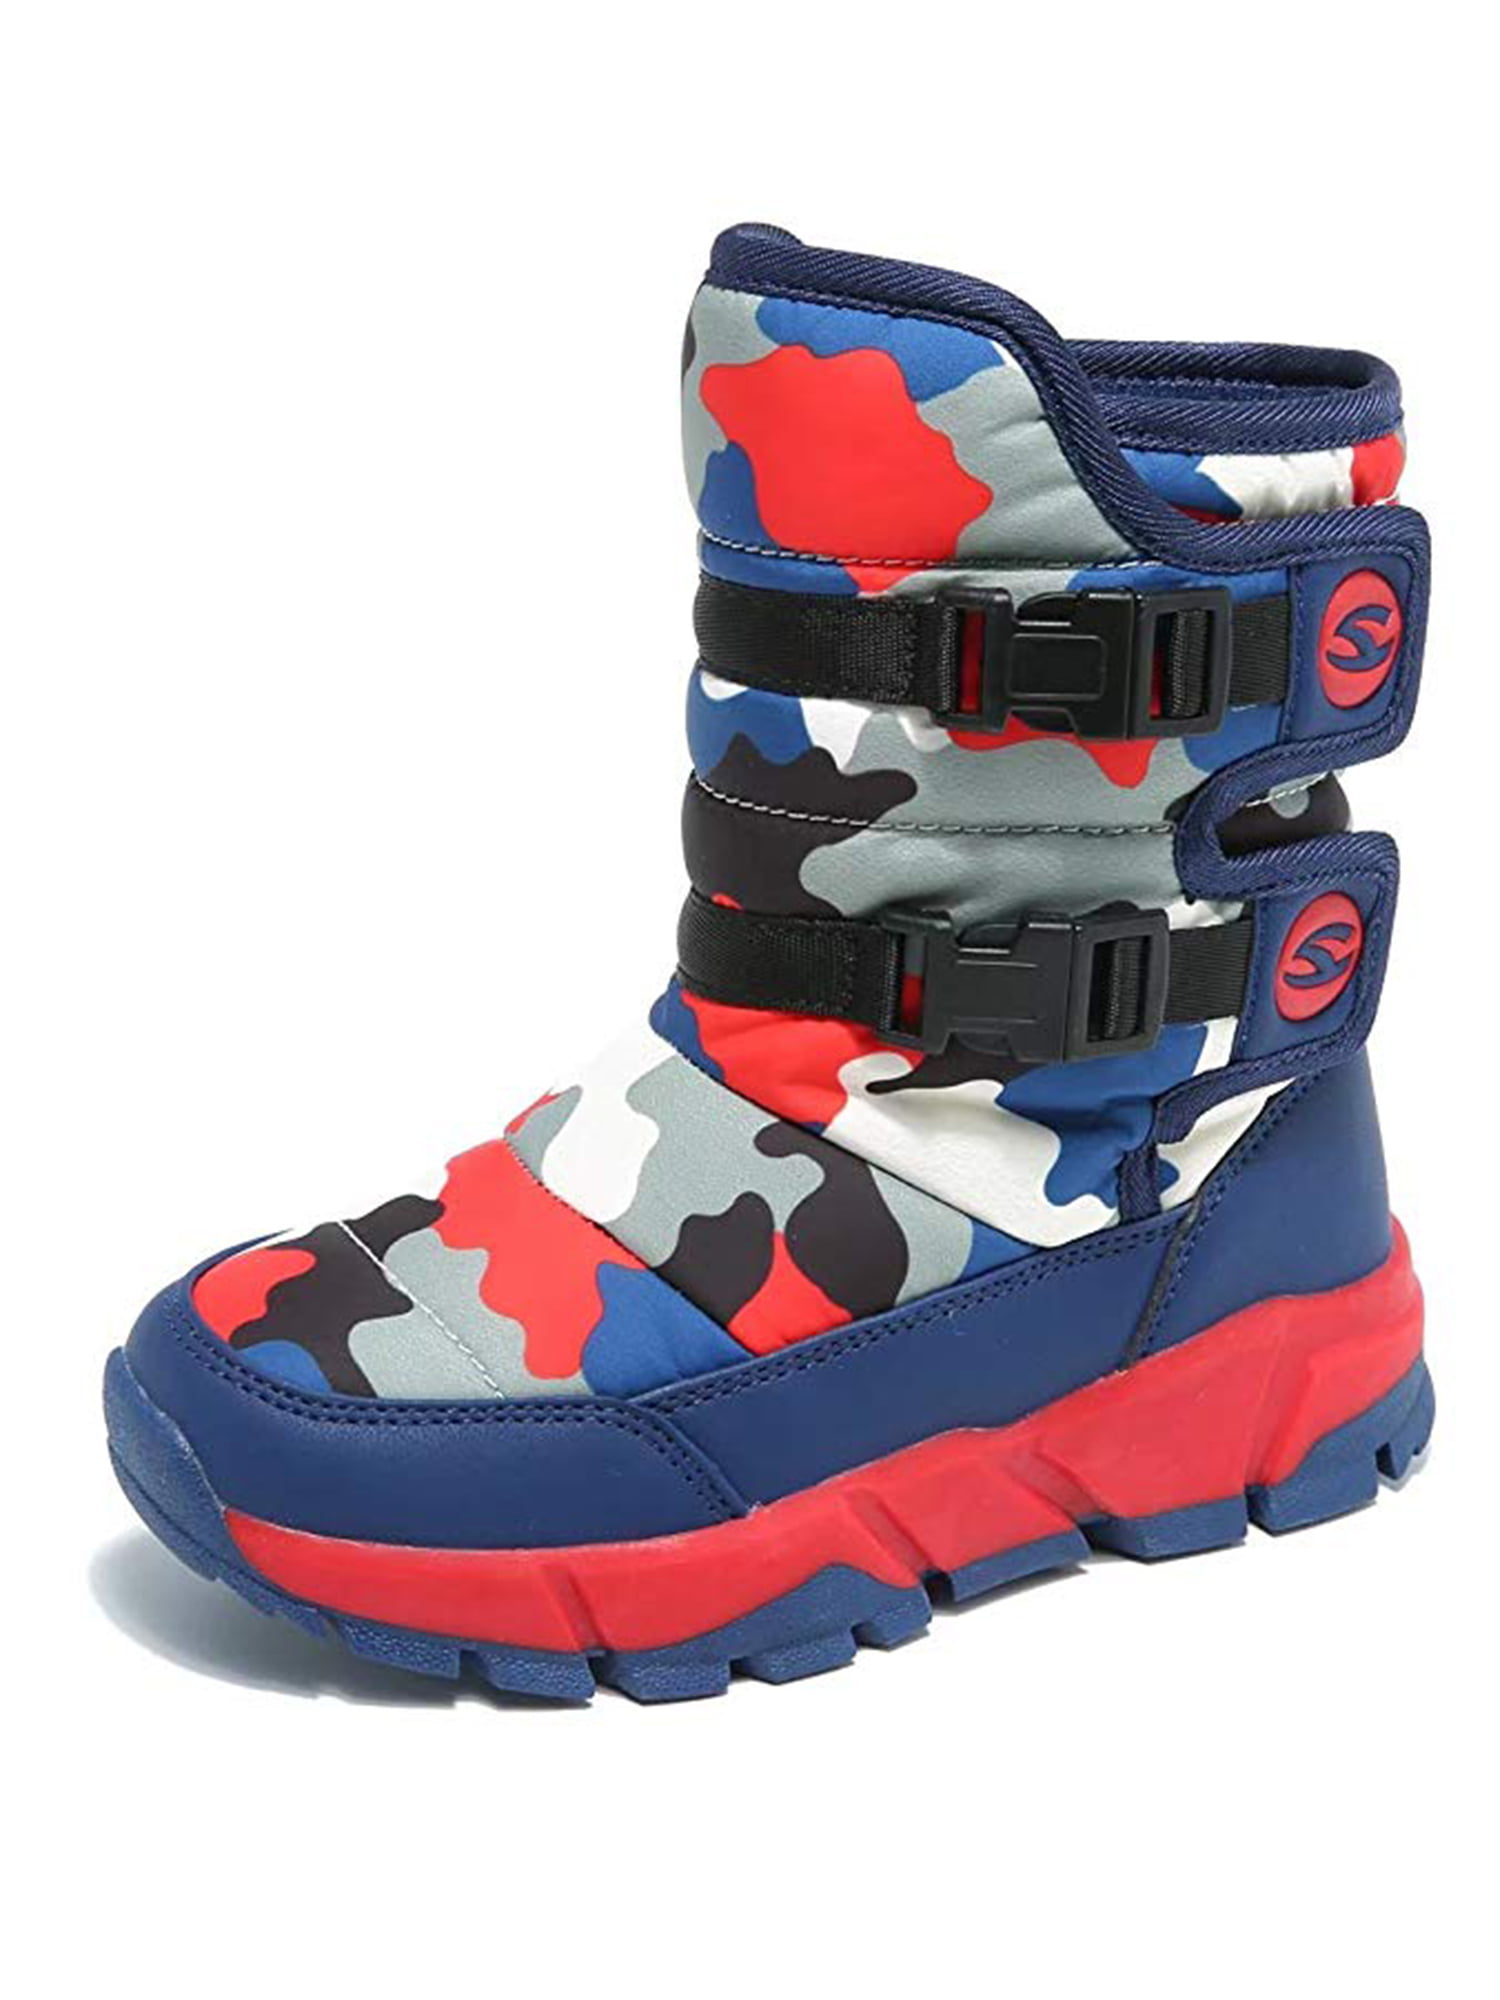 Boys Snow Boots Winter Waterproof Slip Resistant Cold Weather Shoes ...